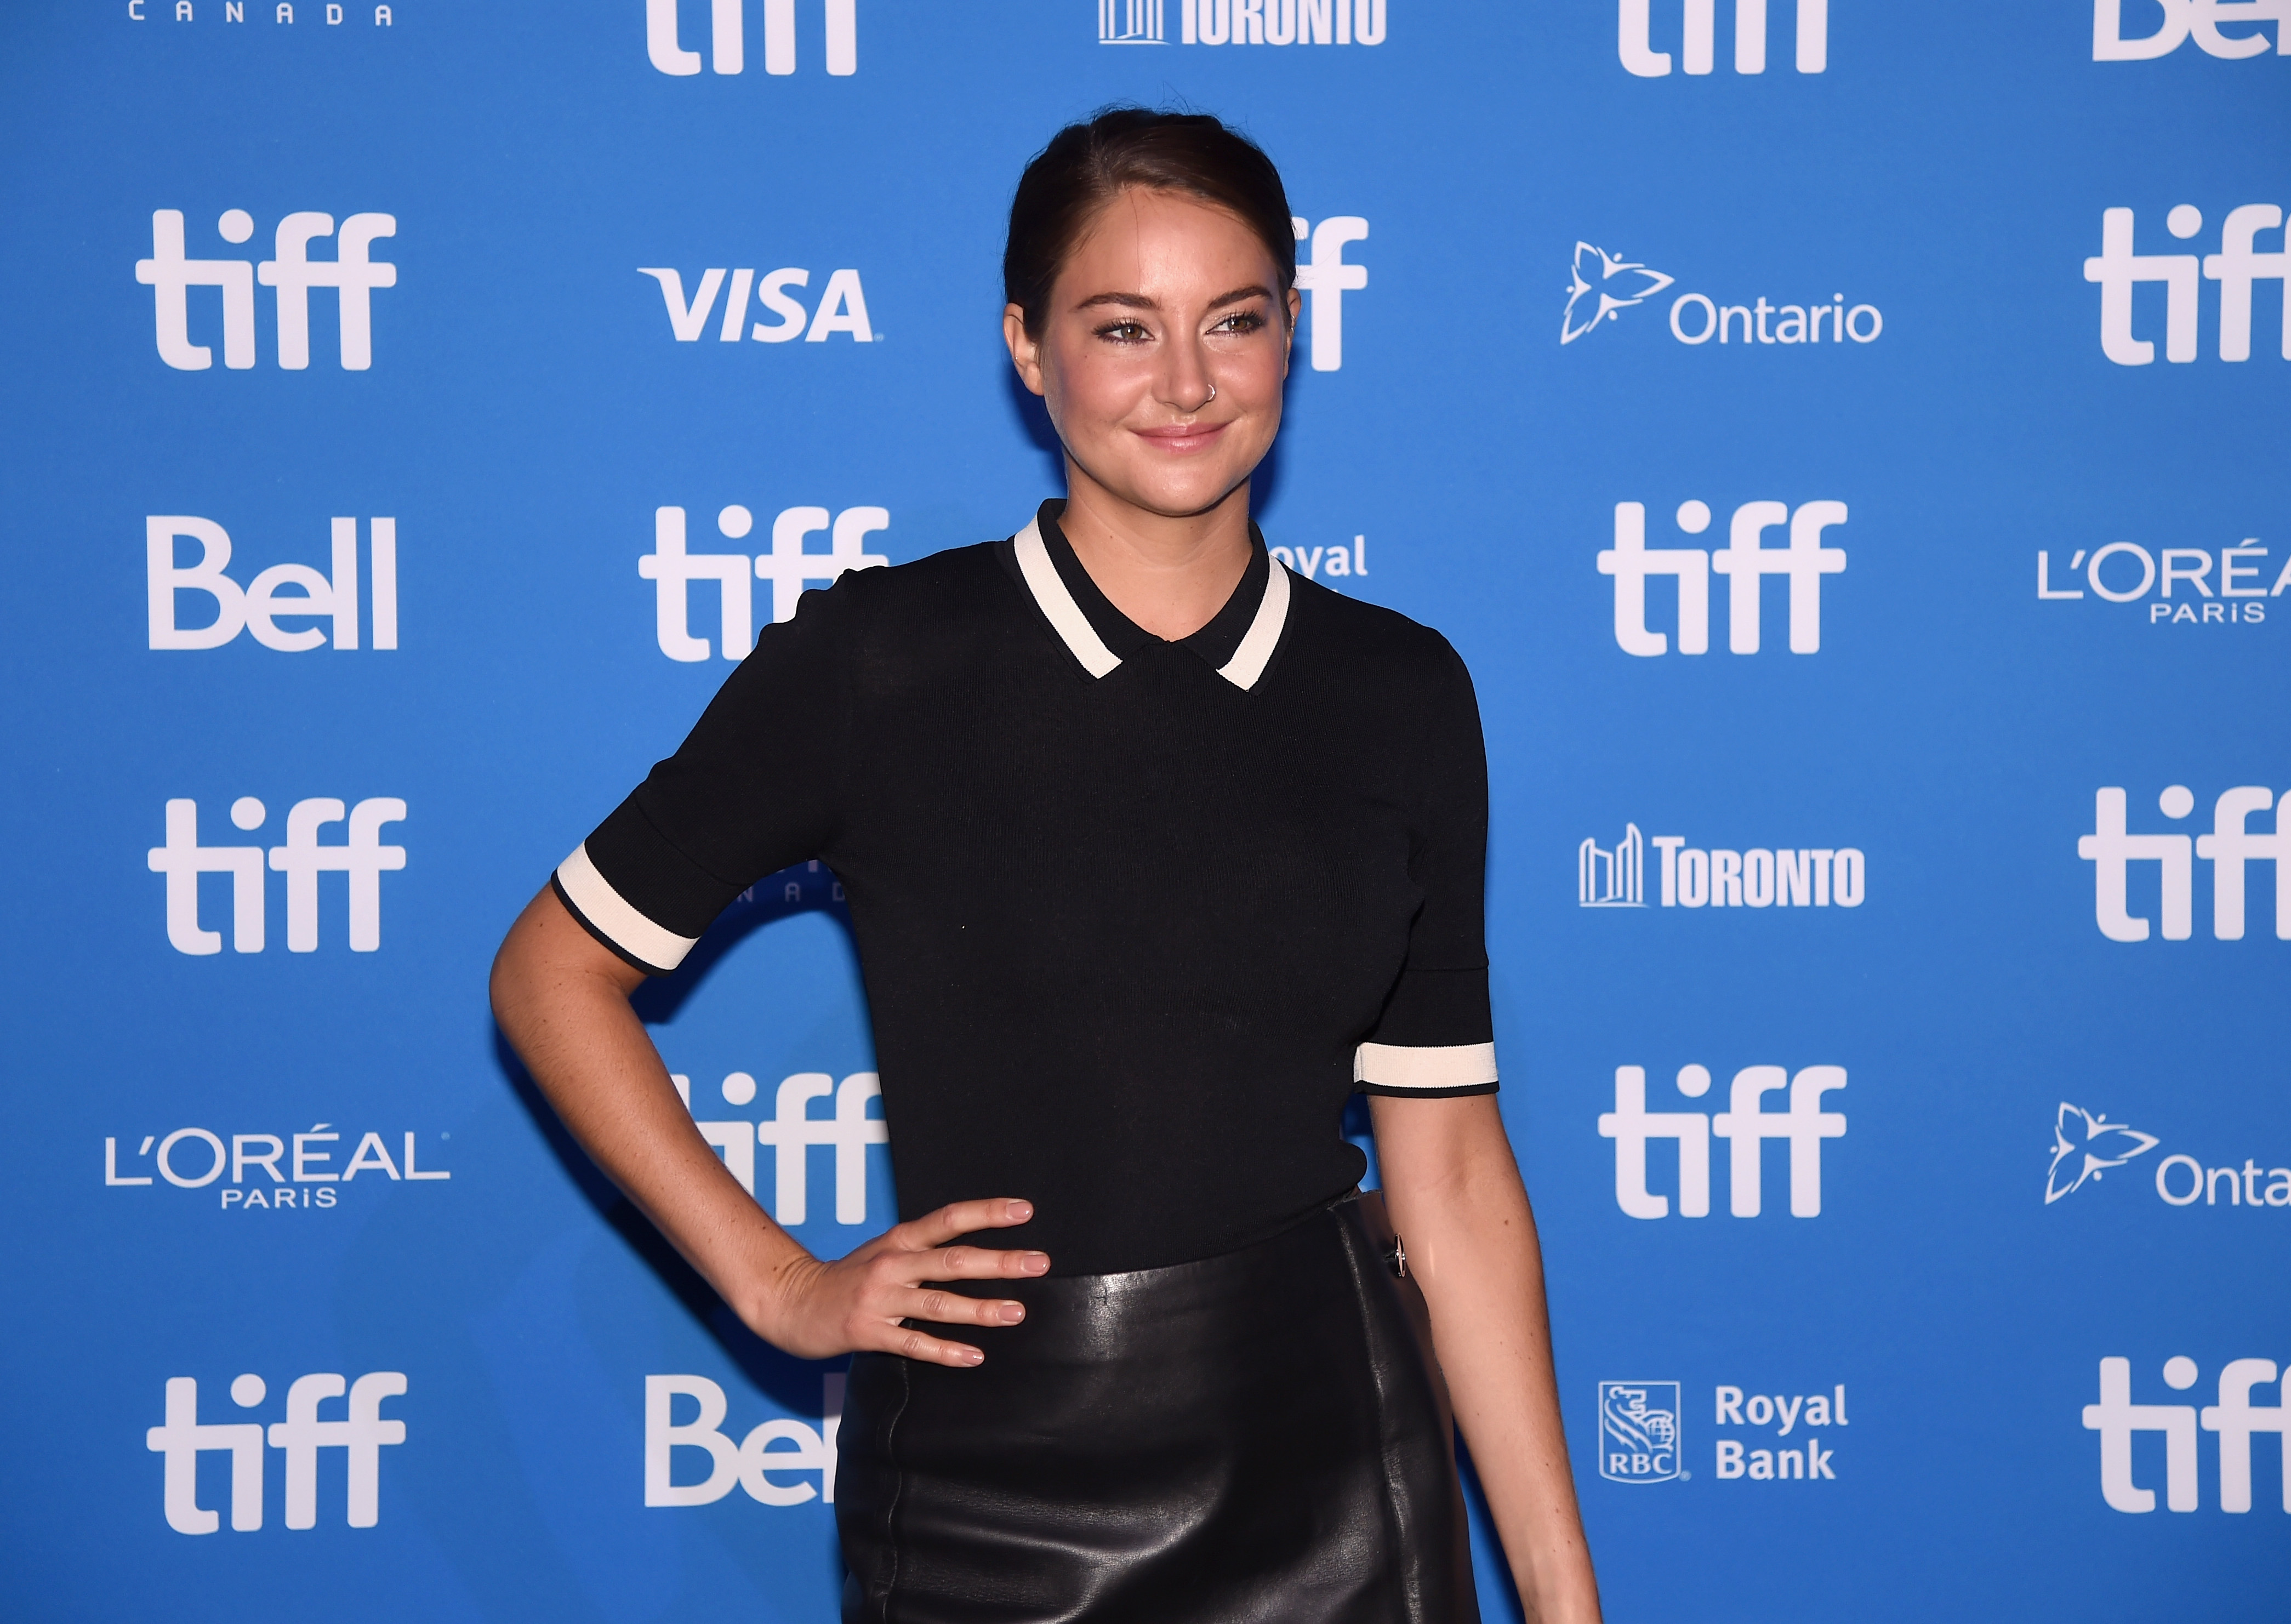 Actress Shailene Woodley attends "Snowden" press conference during the 2016 Toronto International Film Festival at TIFF Bell Lightbox in Toronto on Sept. 10, 2016 . (Kevin Winter—Getty Images)